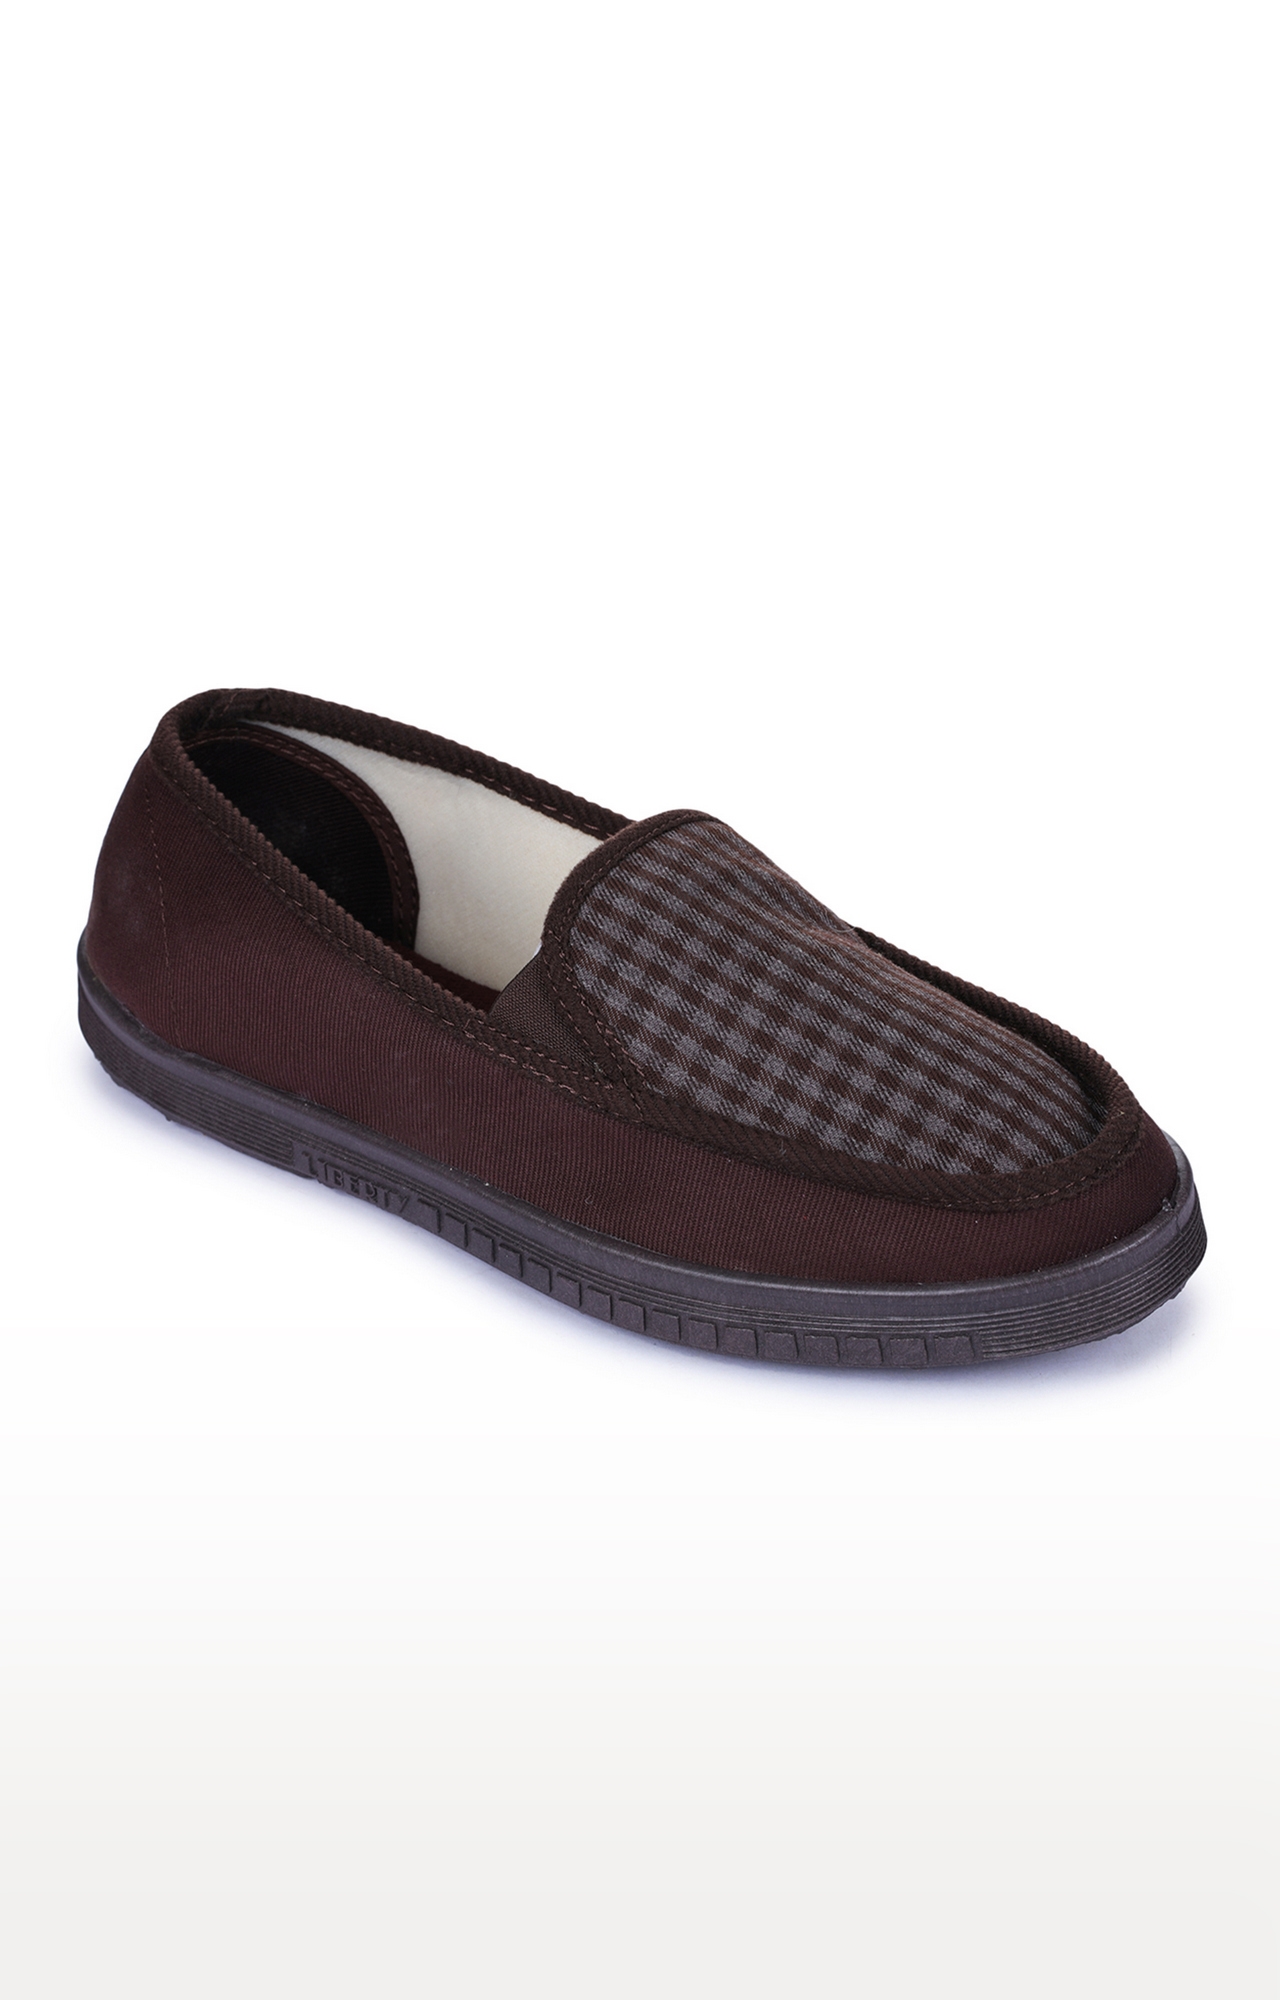 Liberty | Gliders by Liberty Brown Casual Slip-ons